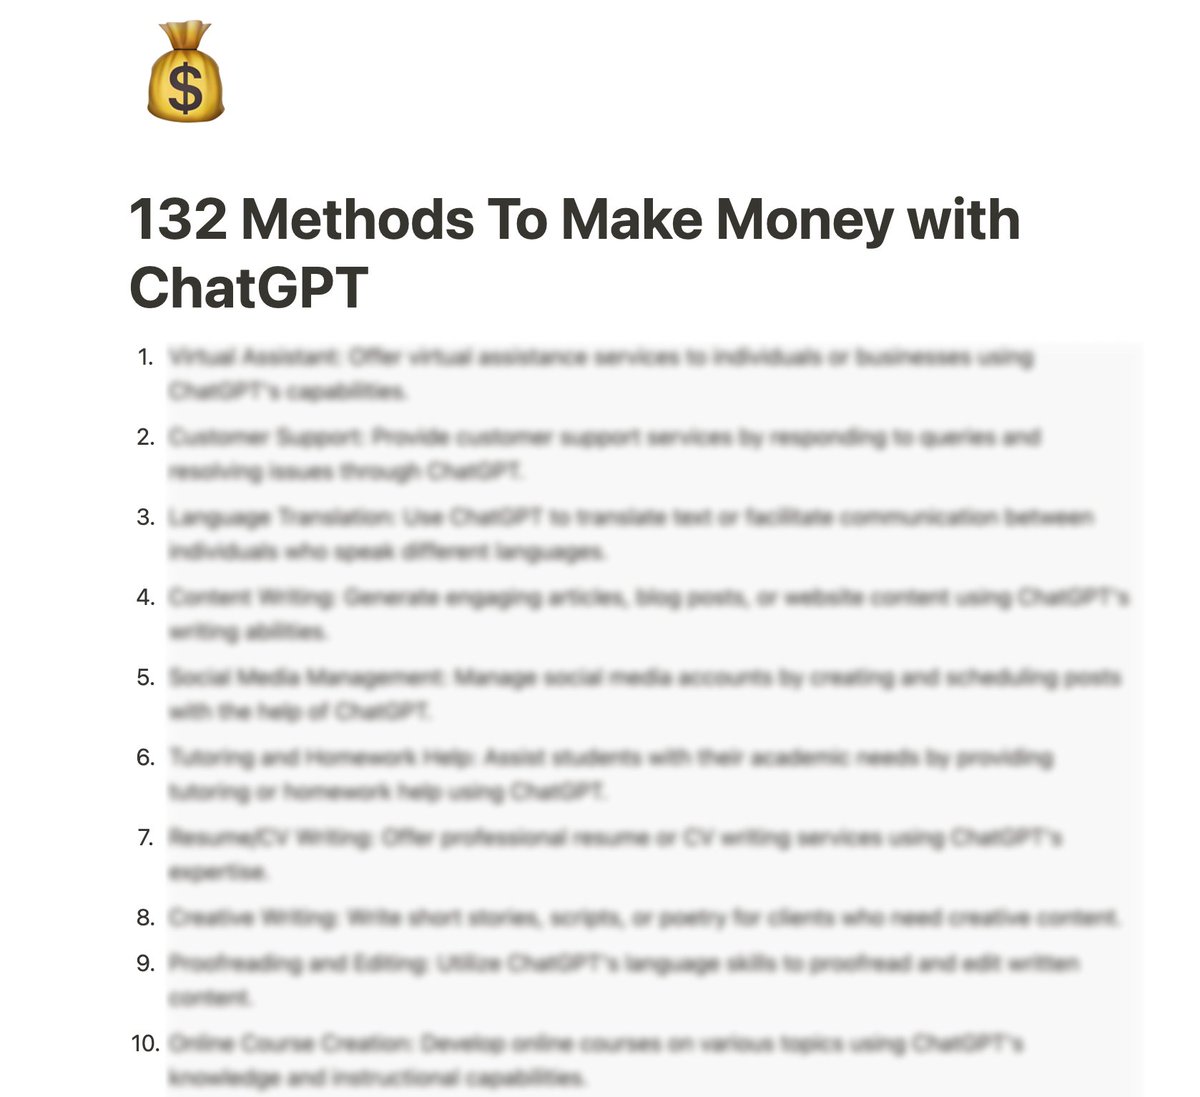 Kids are making $20K/month with ChatGPT.

But most people still don't understand how.

So I curated 132+ Methods to make money with ChatGPT so you can do it too.

Normally $25, but next 24 hrs it's FREE.

To get it:

1. Follow me (so I can DM you)
2. RT this tweet
3. Reply 'GPT'